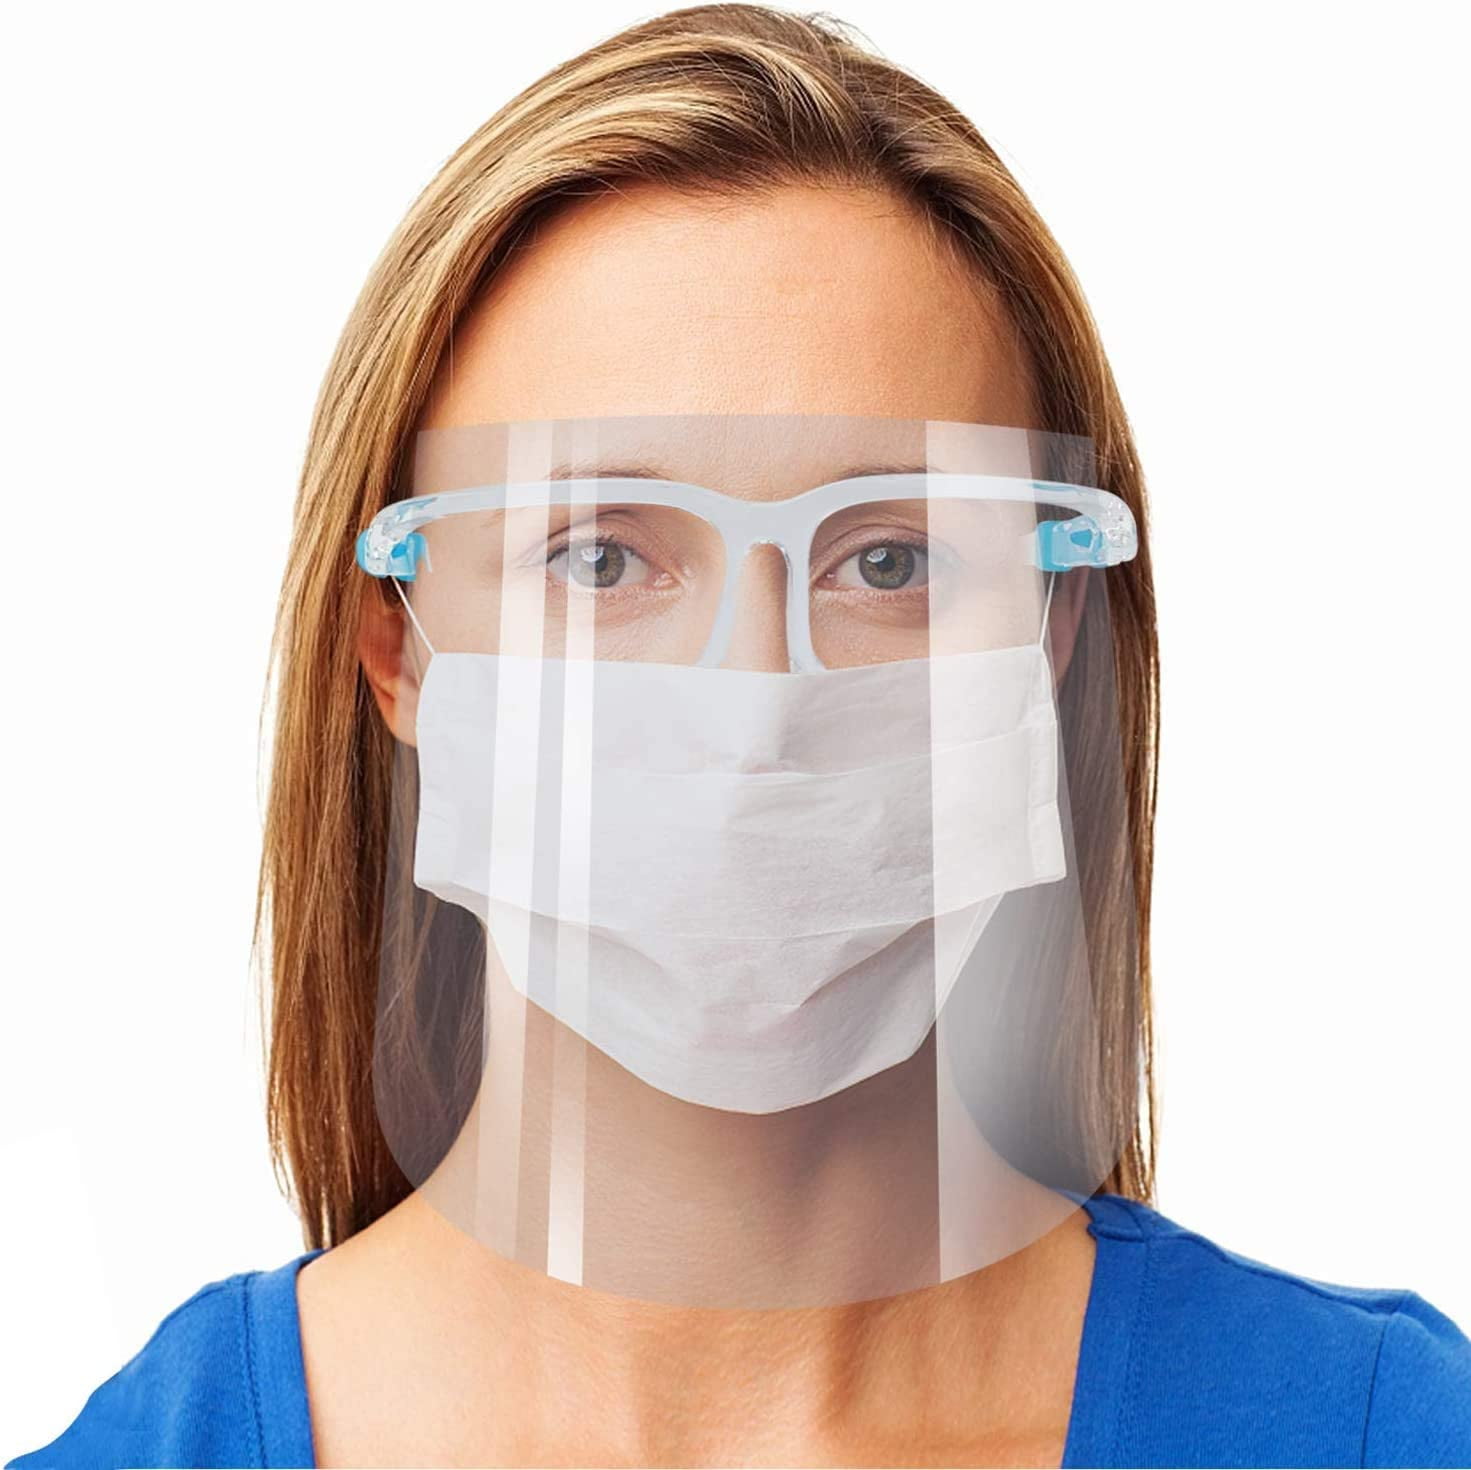 Details about   10X Face Shield Protective Facial Cover Transparent Glasses Visor Anti-Fog Cover 